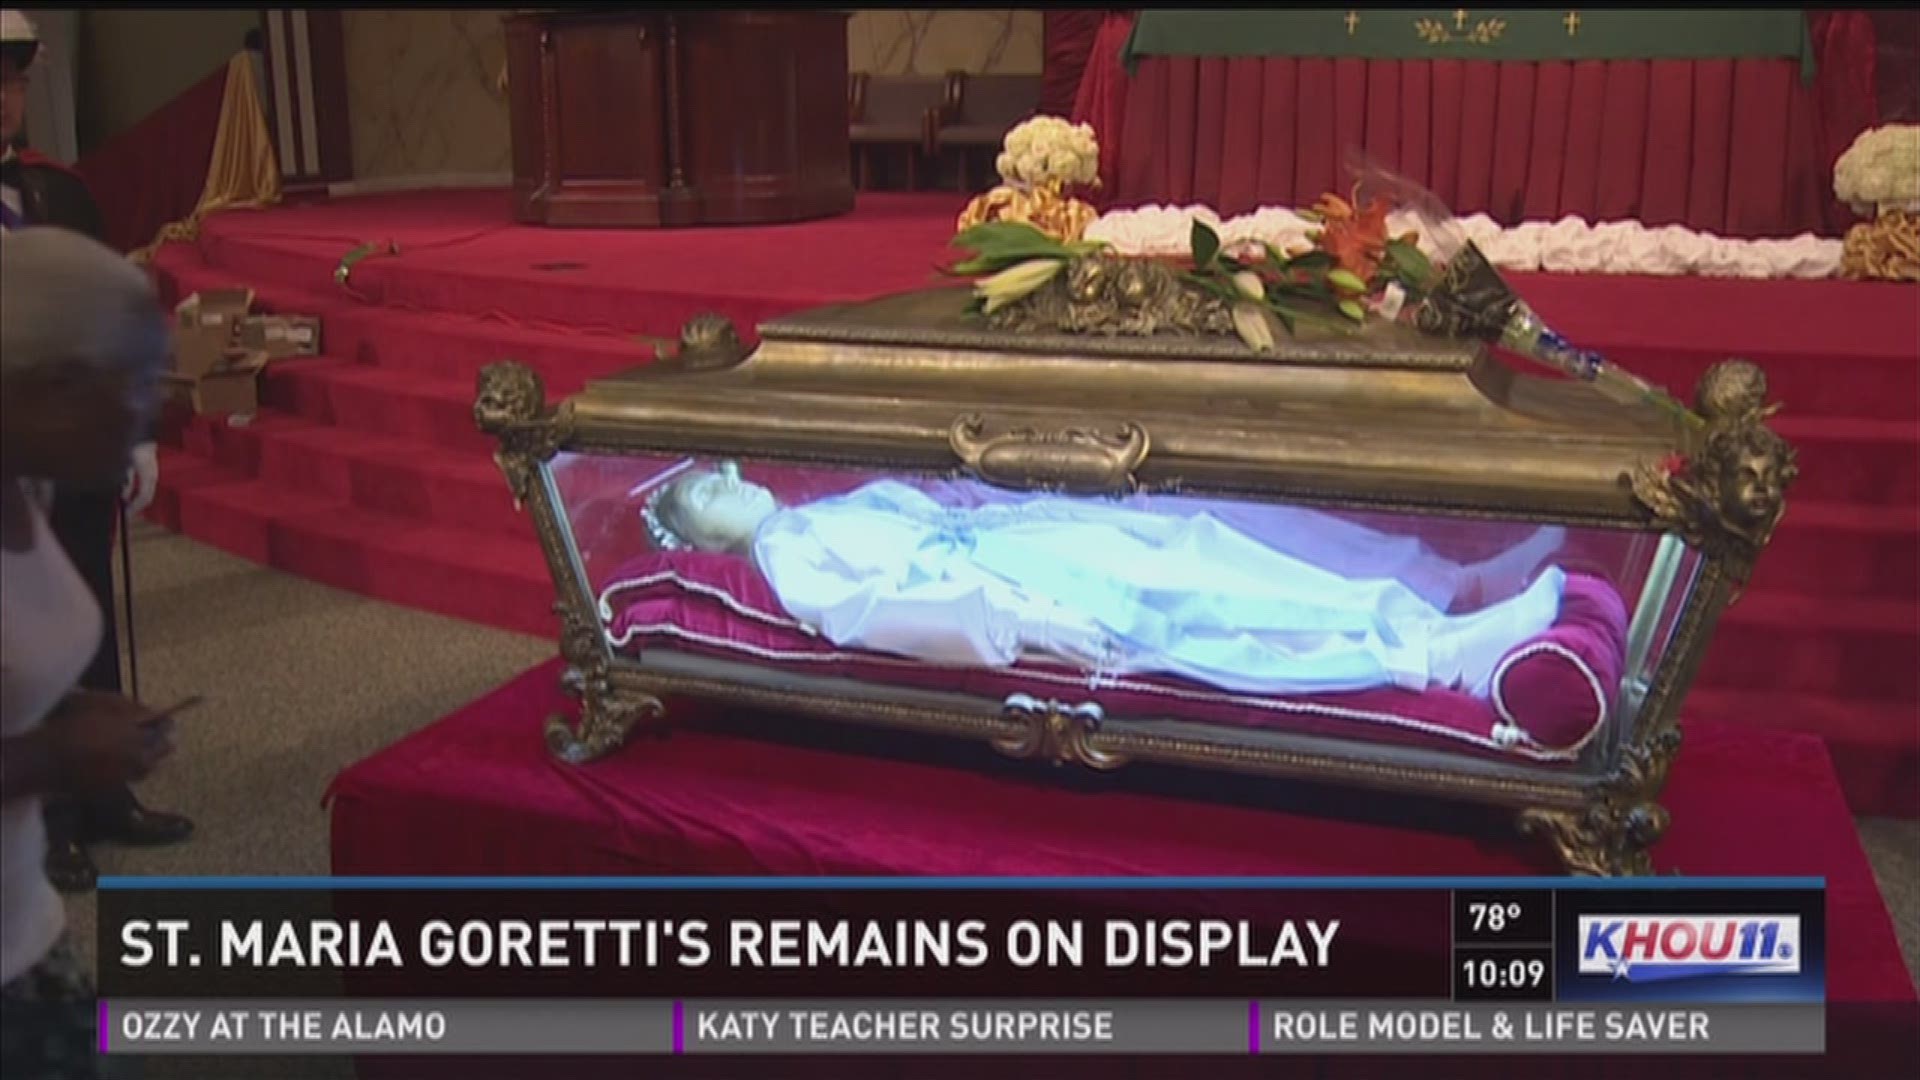 Hundreds gathered at the Catholic Charismatic Center to view the relics of St. Maria Goretti. Her remains were brought to the U.S. for the first time. She is revered as a symbol of forgiveness.